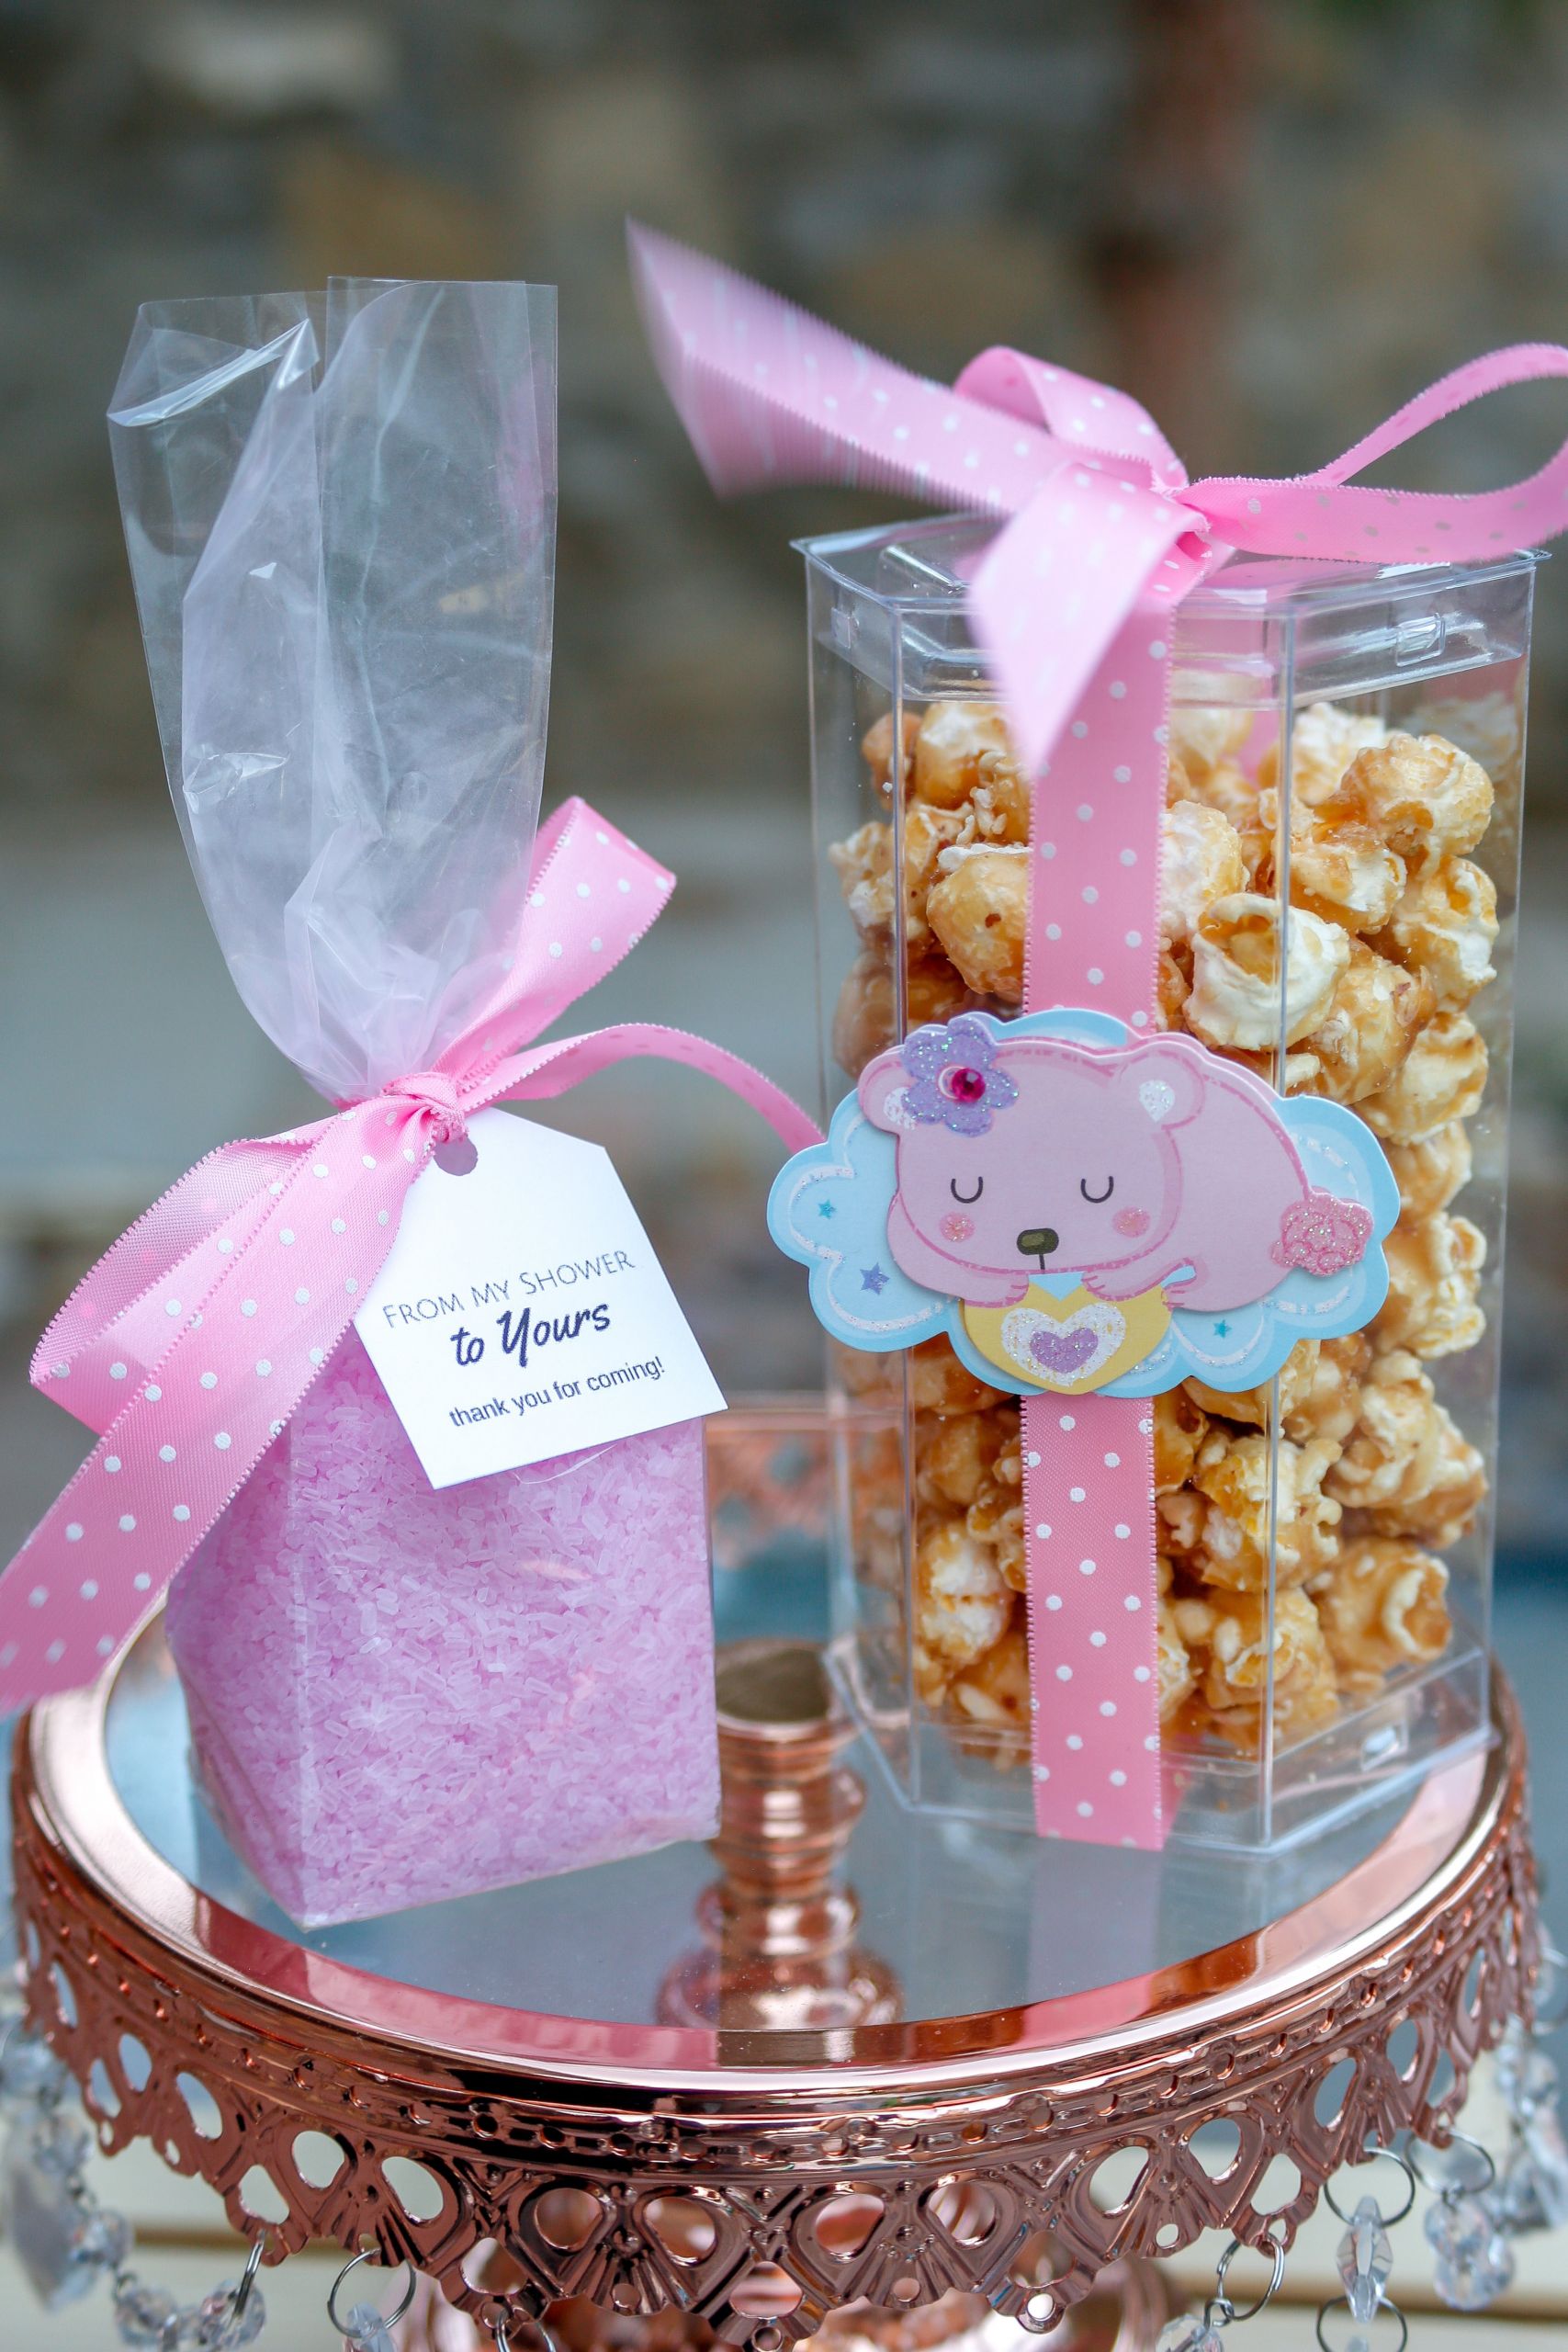 Party Favors For Baby Shower Guests
 DIY Baby Shower Favor Ideas